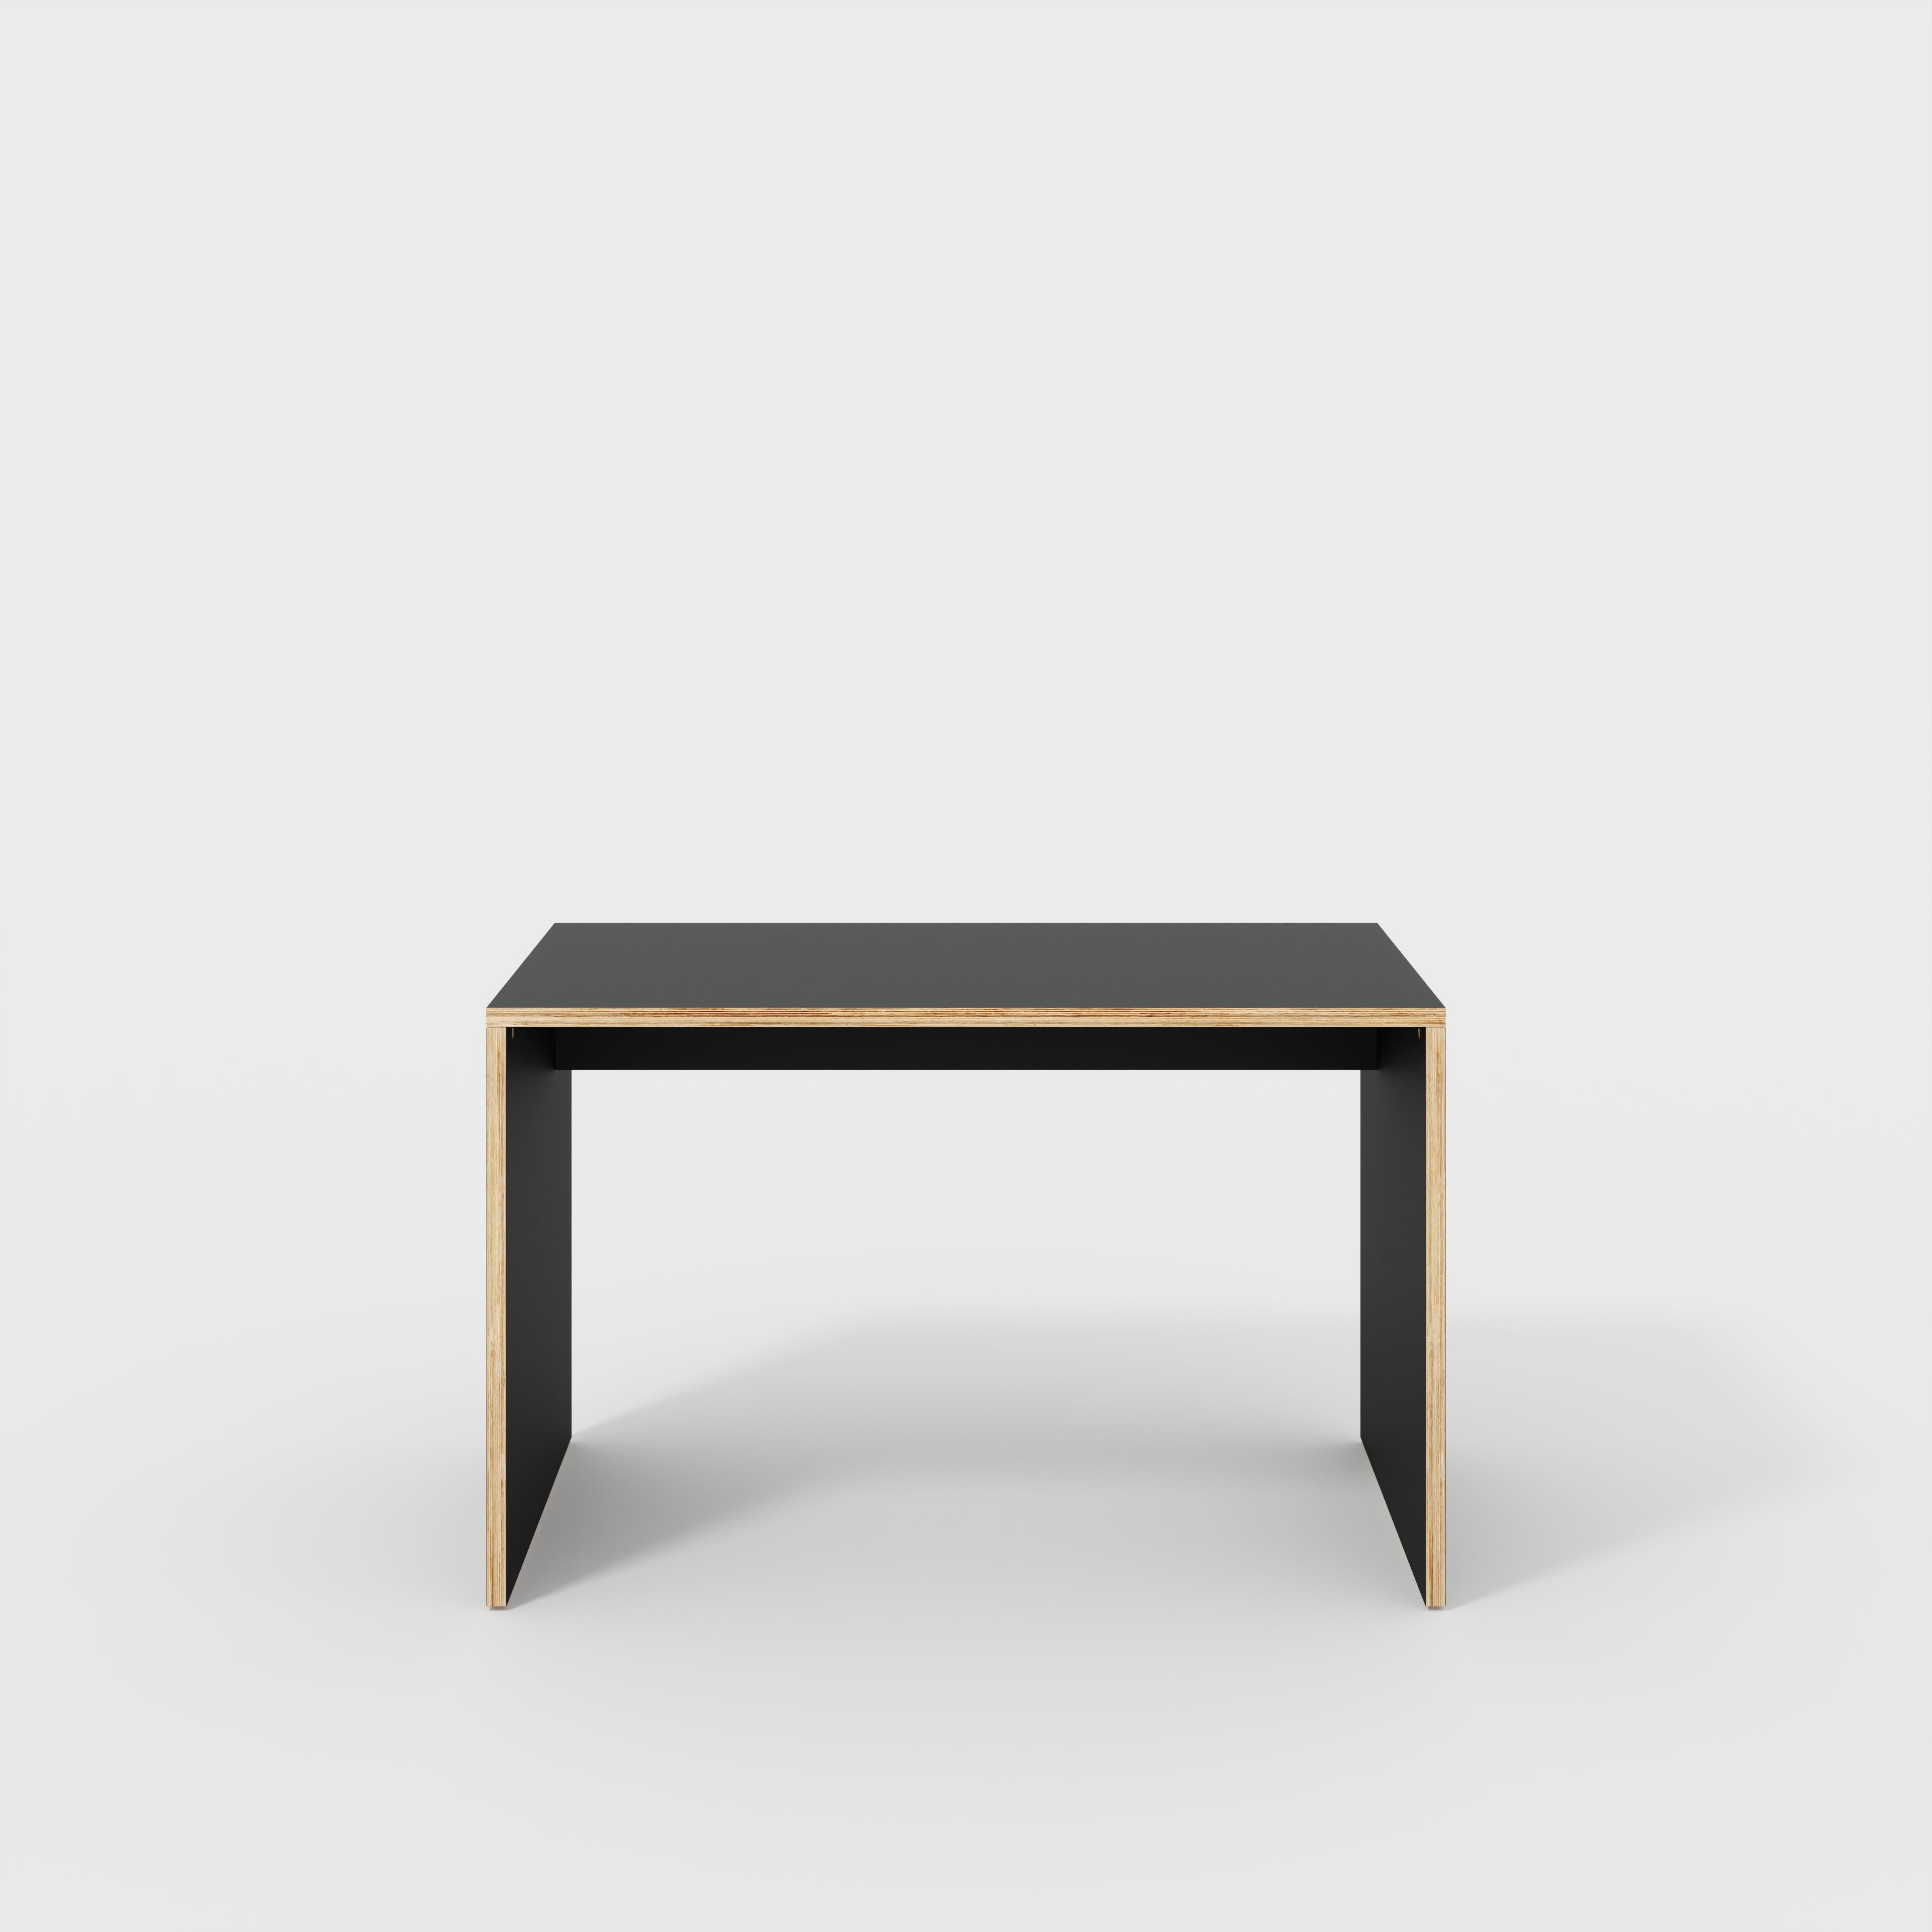 Desk with Solid Sides - Formica Diamond Black - 1200(w) x 600(d) x 750(h)